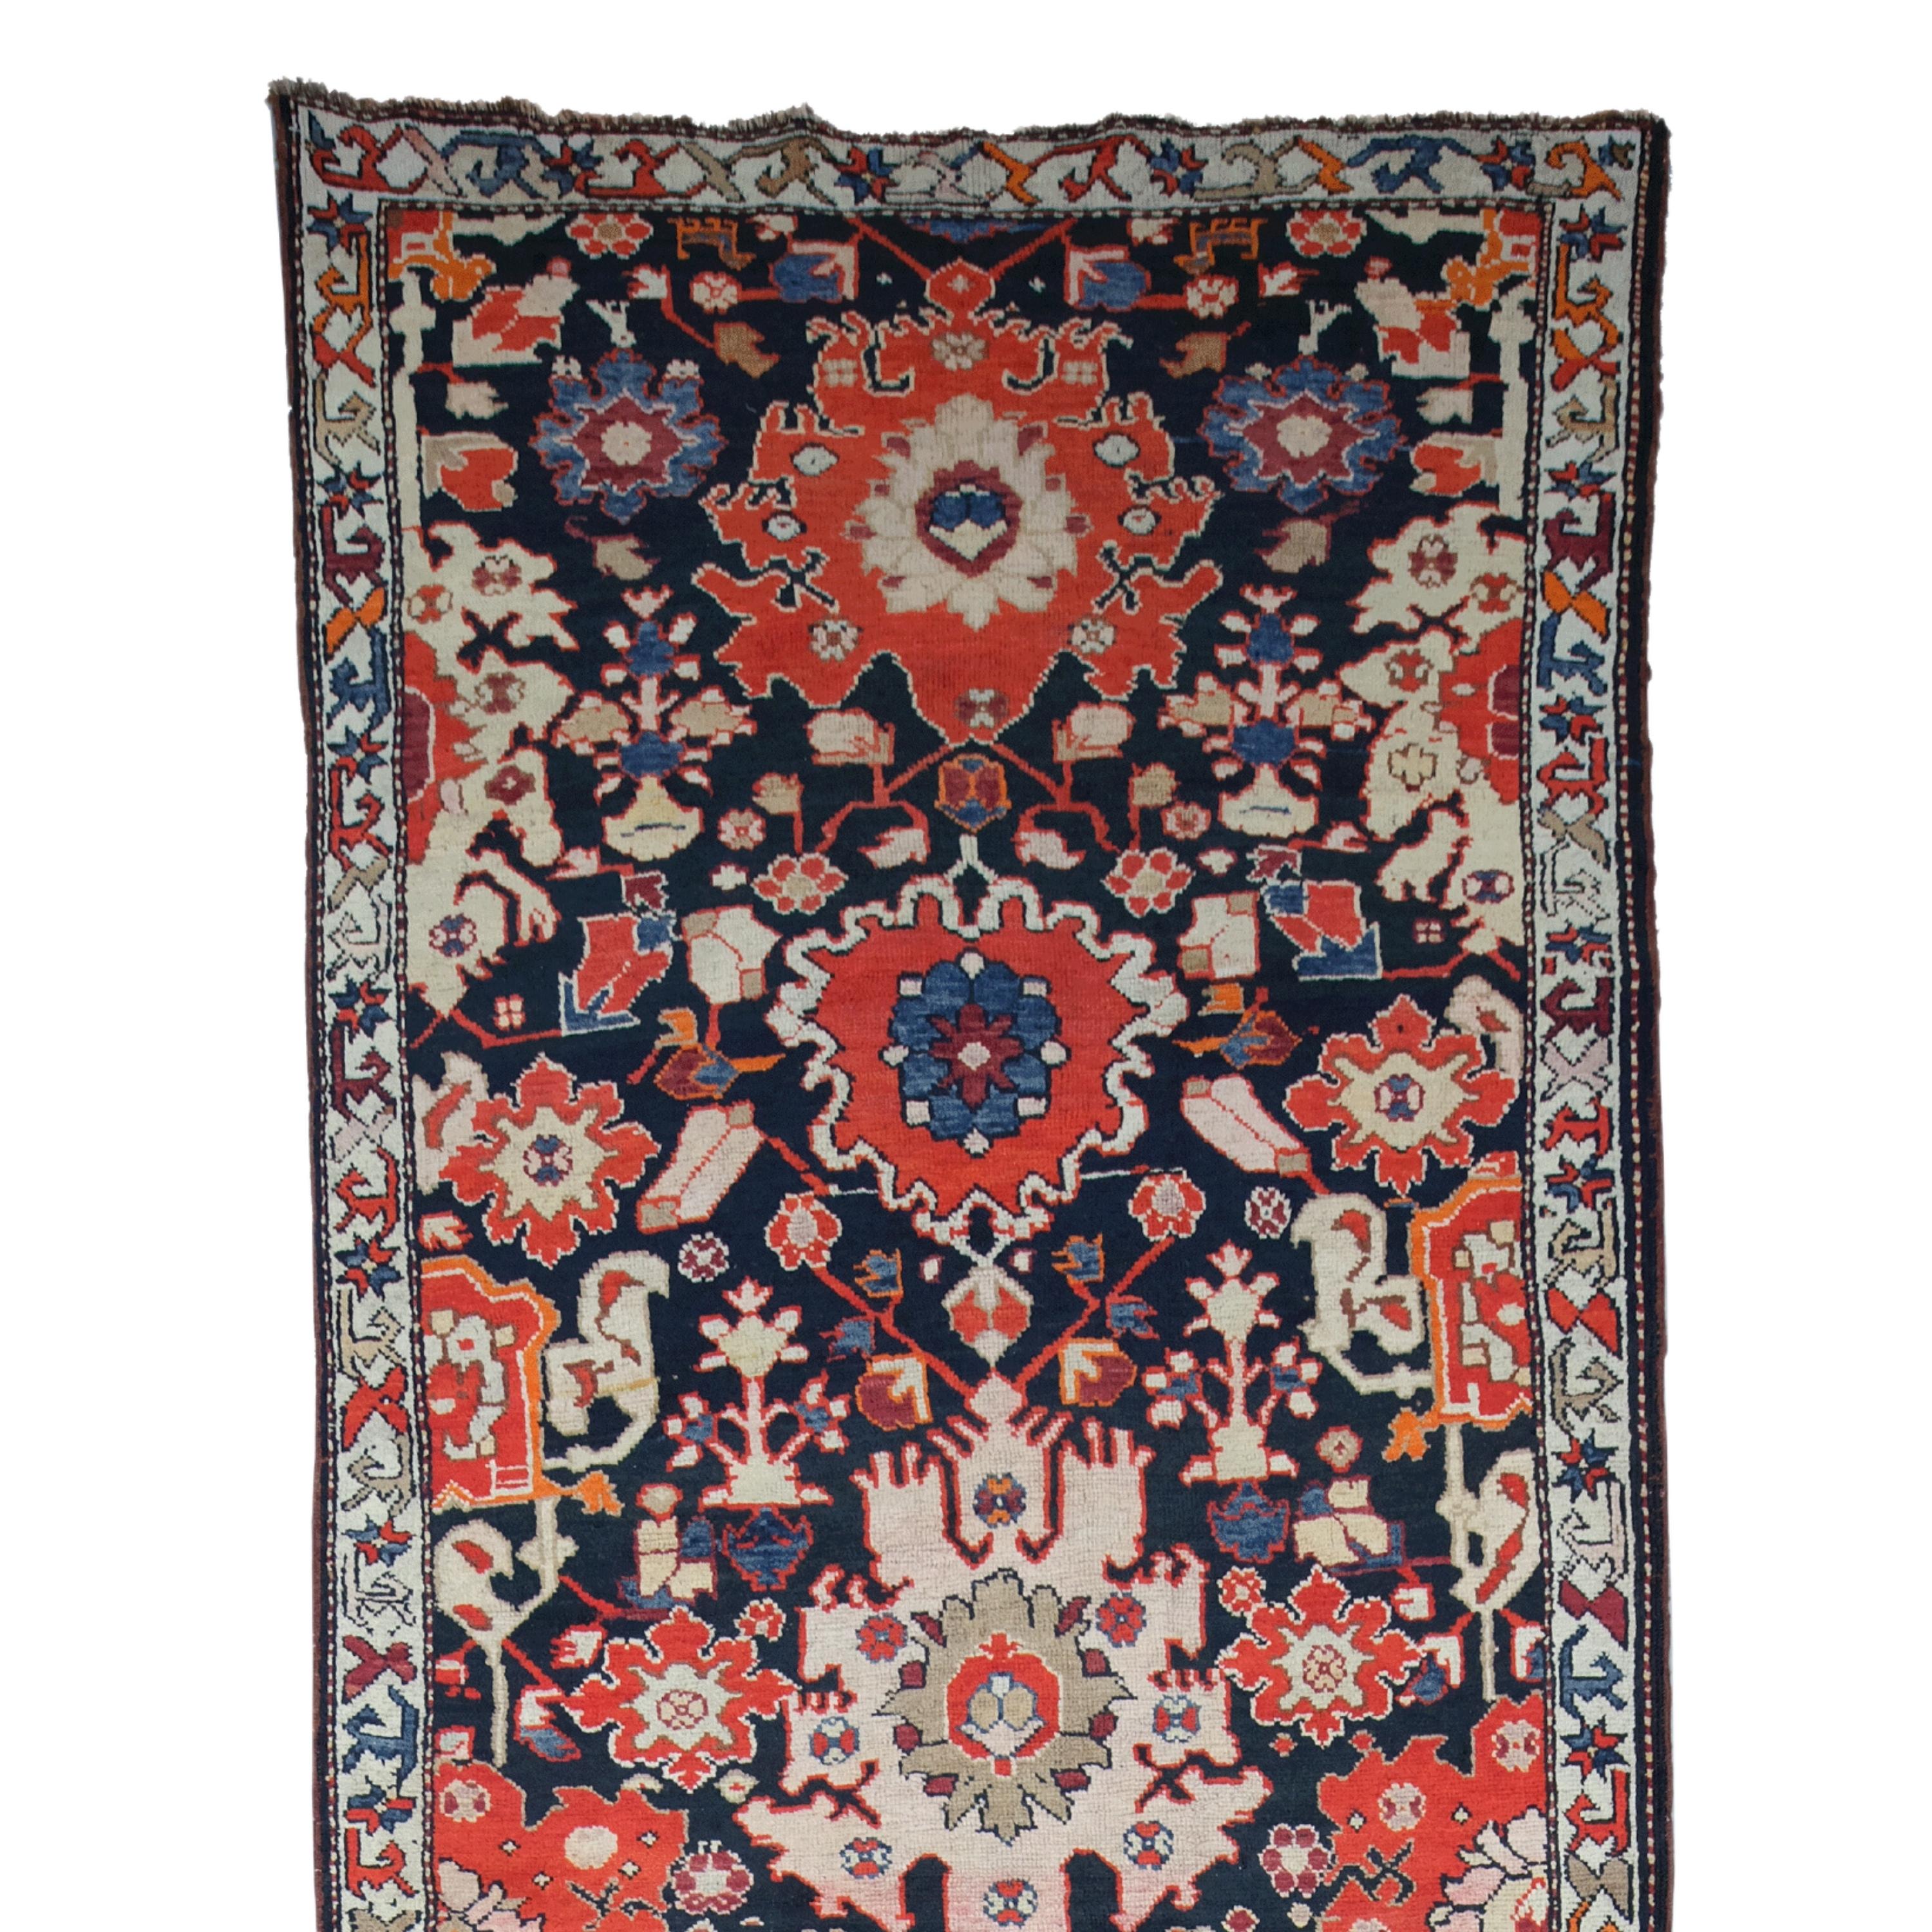 We offer a magnificent 19th century antique Karabakh runner that weaves history, art and culture into every fiber. With its intricate patterns and vibrant colors, this piece is not just a carpet, but a narrative of the rich Karabakh